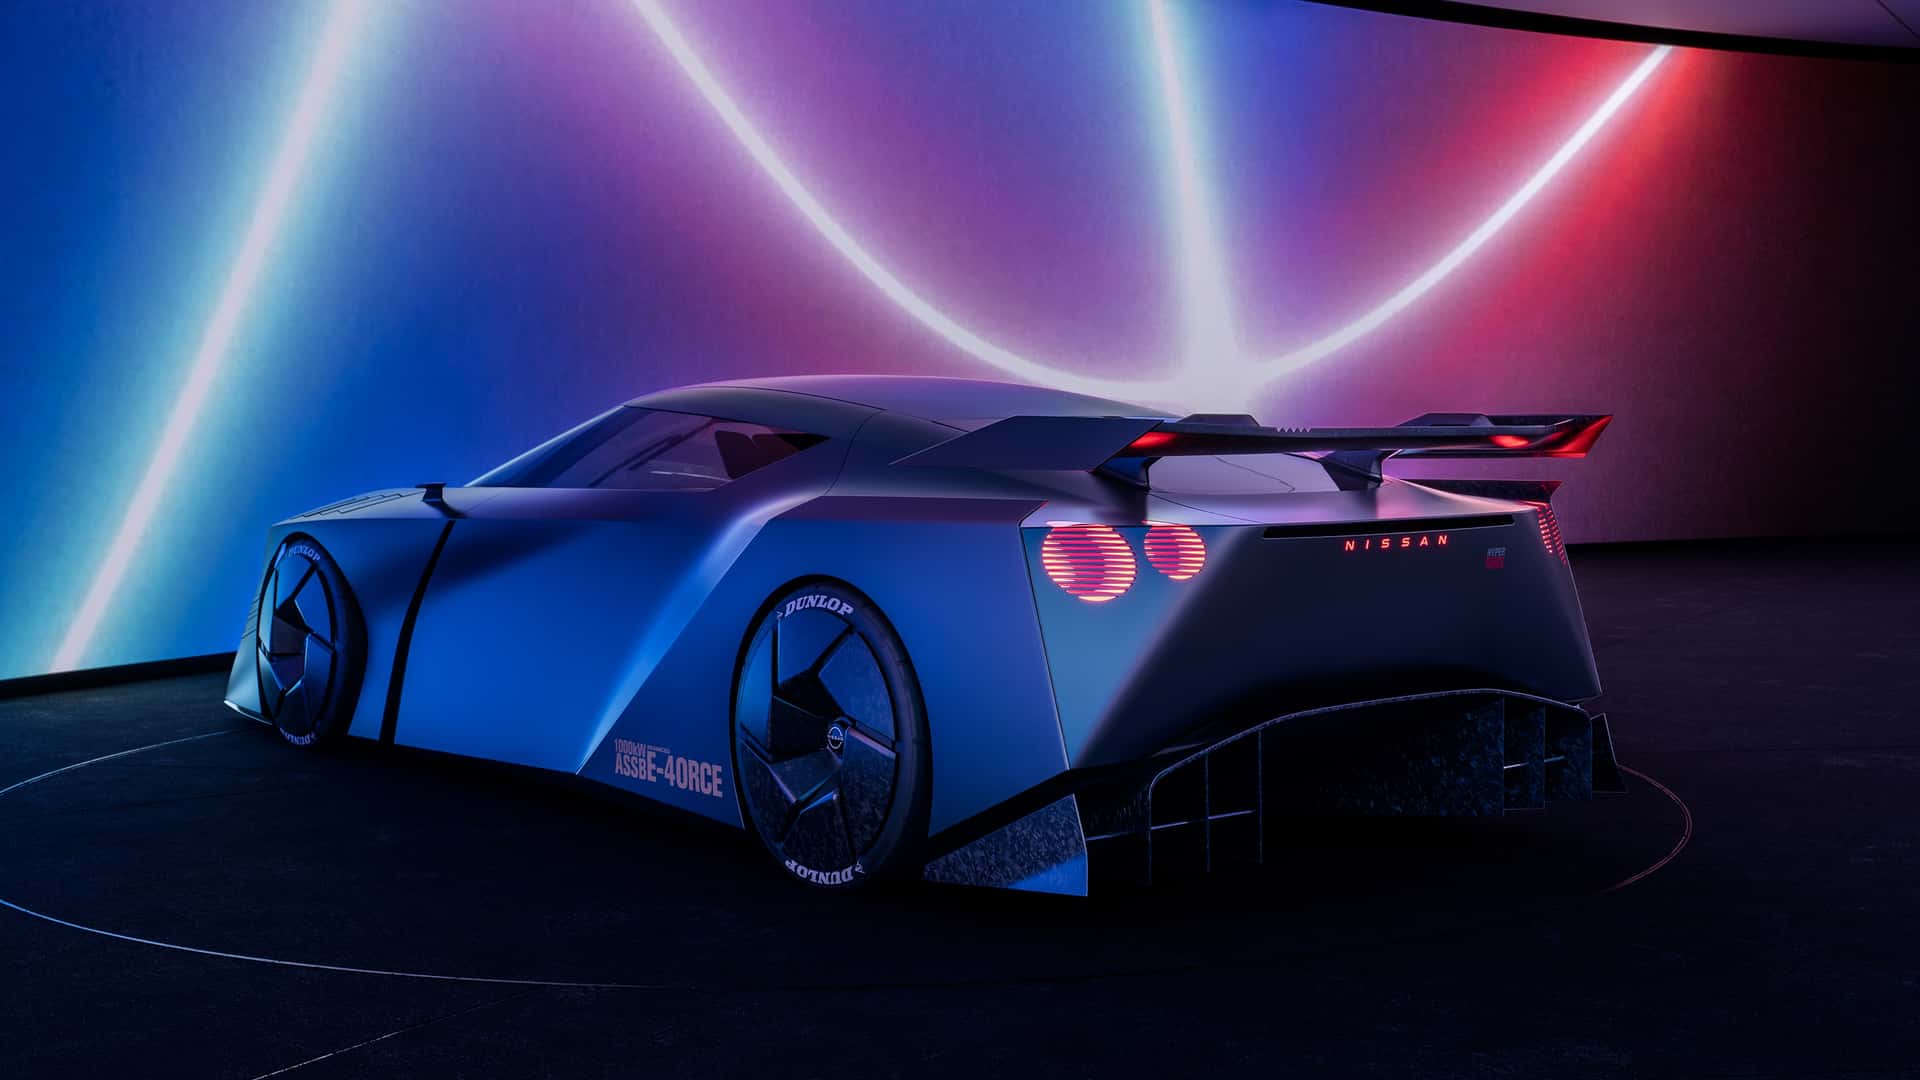 Nissan Hyper Force Performance EV Concept: It could potentially be the next all-electric GT-R